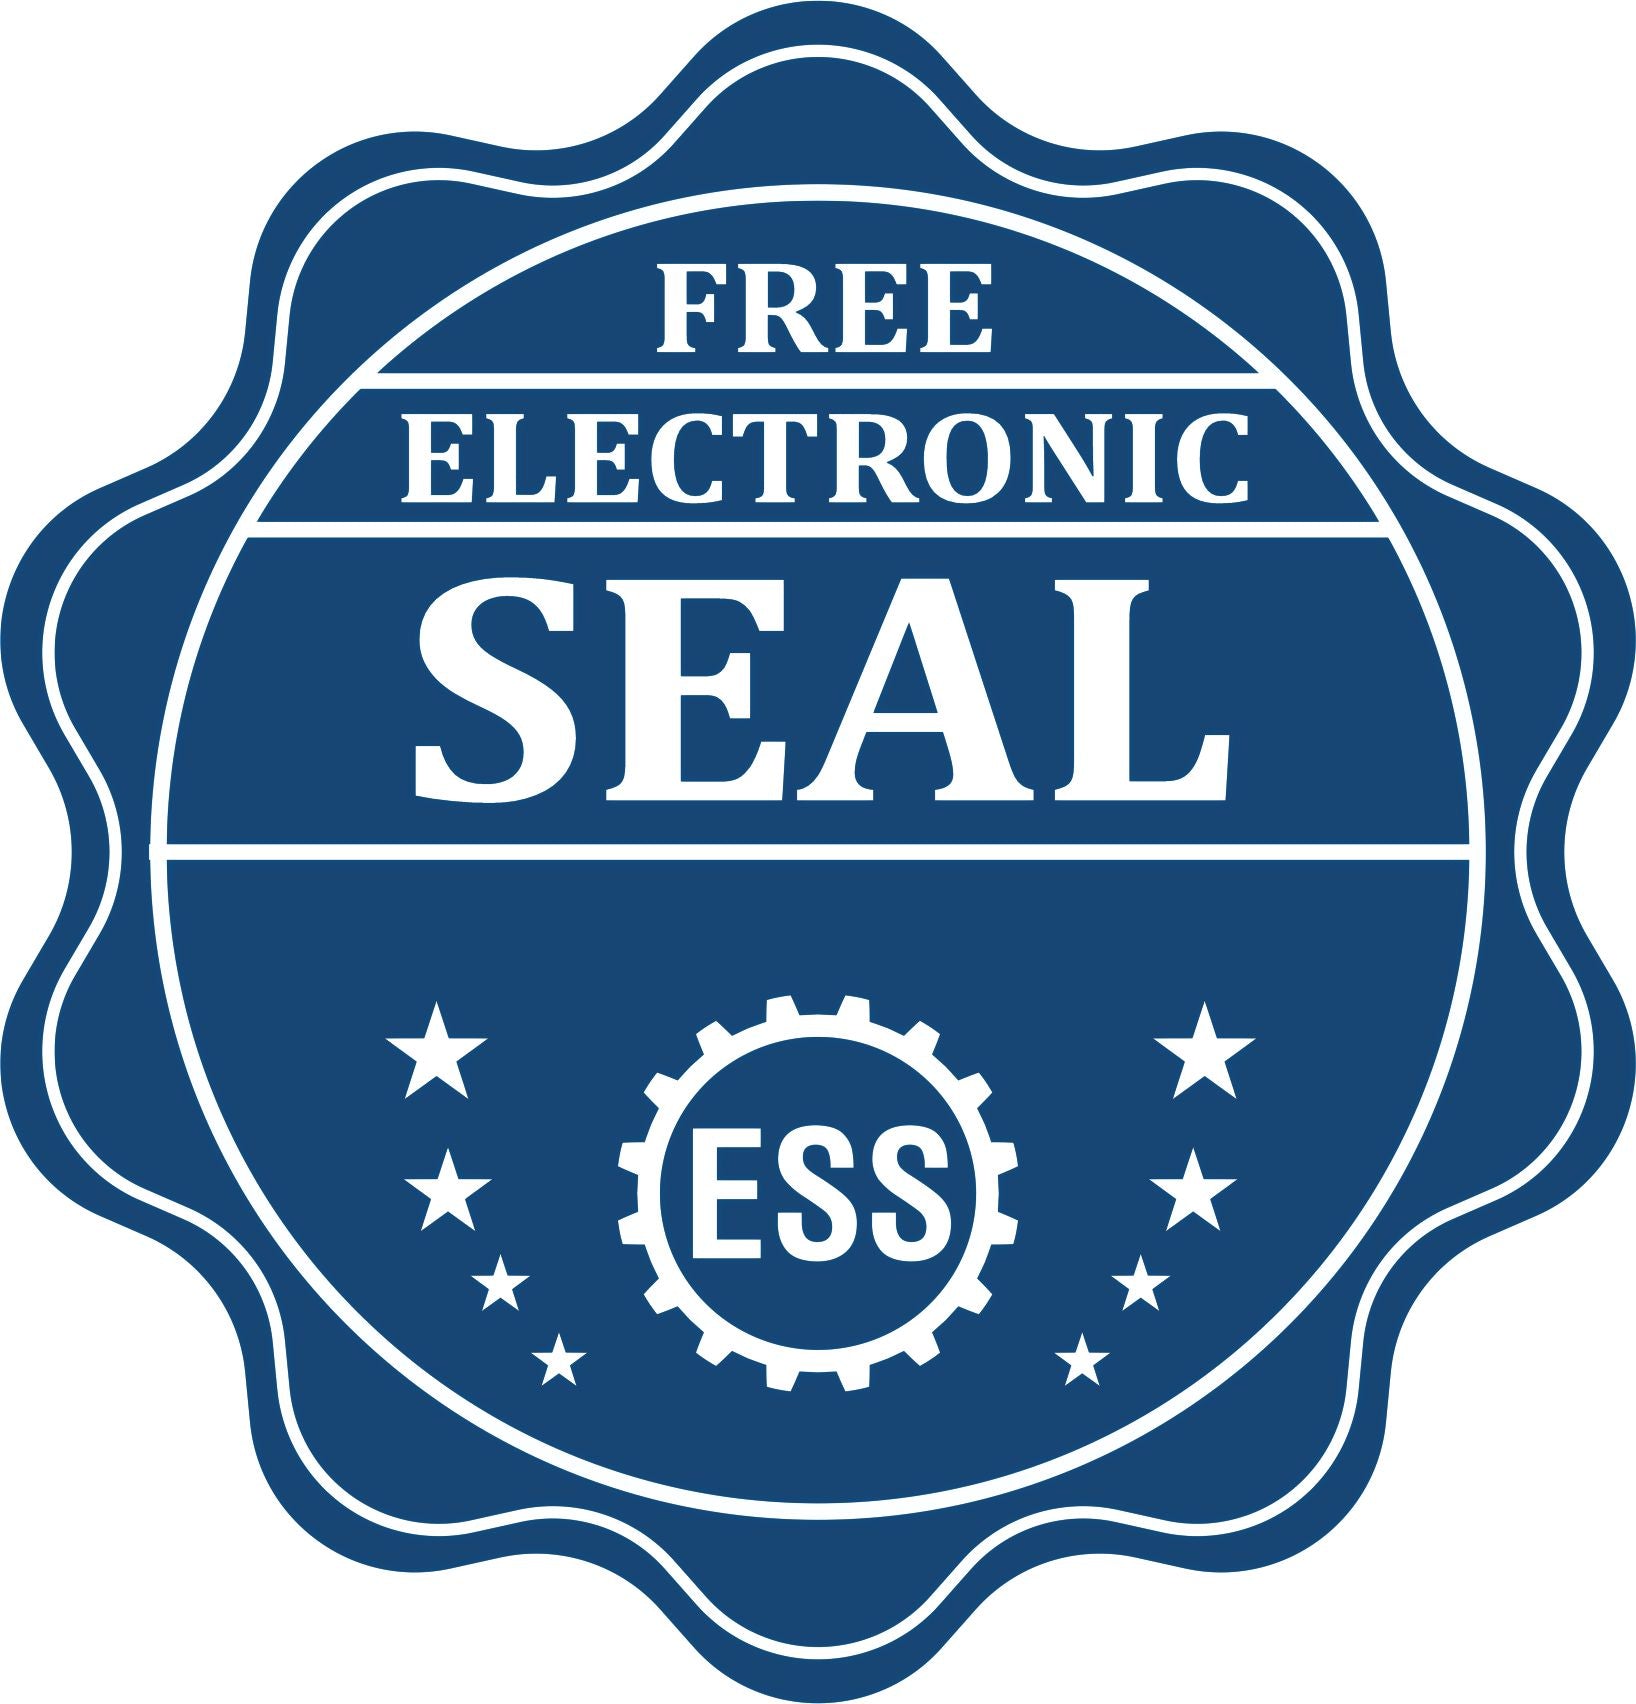 A badge showing a free electronic seal for the Long Reach South Dakota PE Seal with stars and the ESS gear on the emblem.